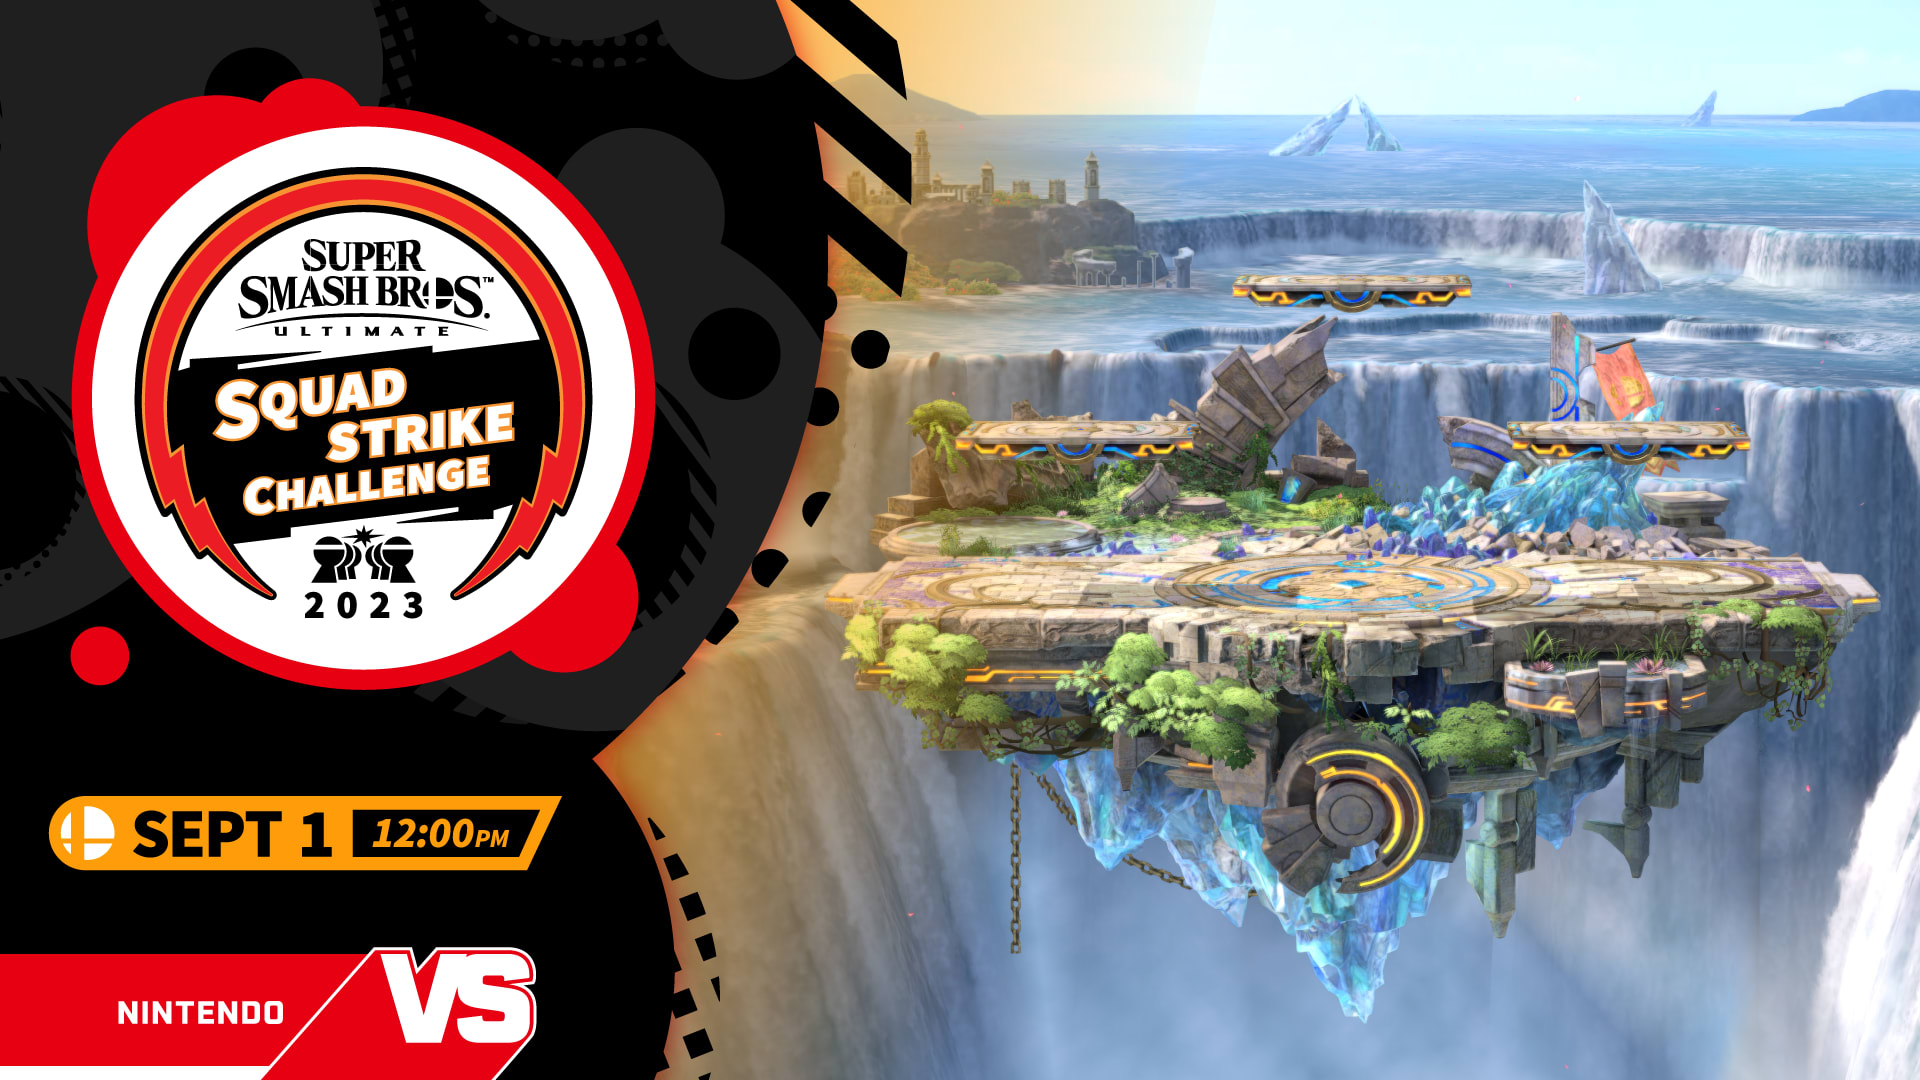 The Battlefield stage from the Super Smash Bros. Ultimate game.